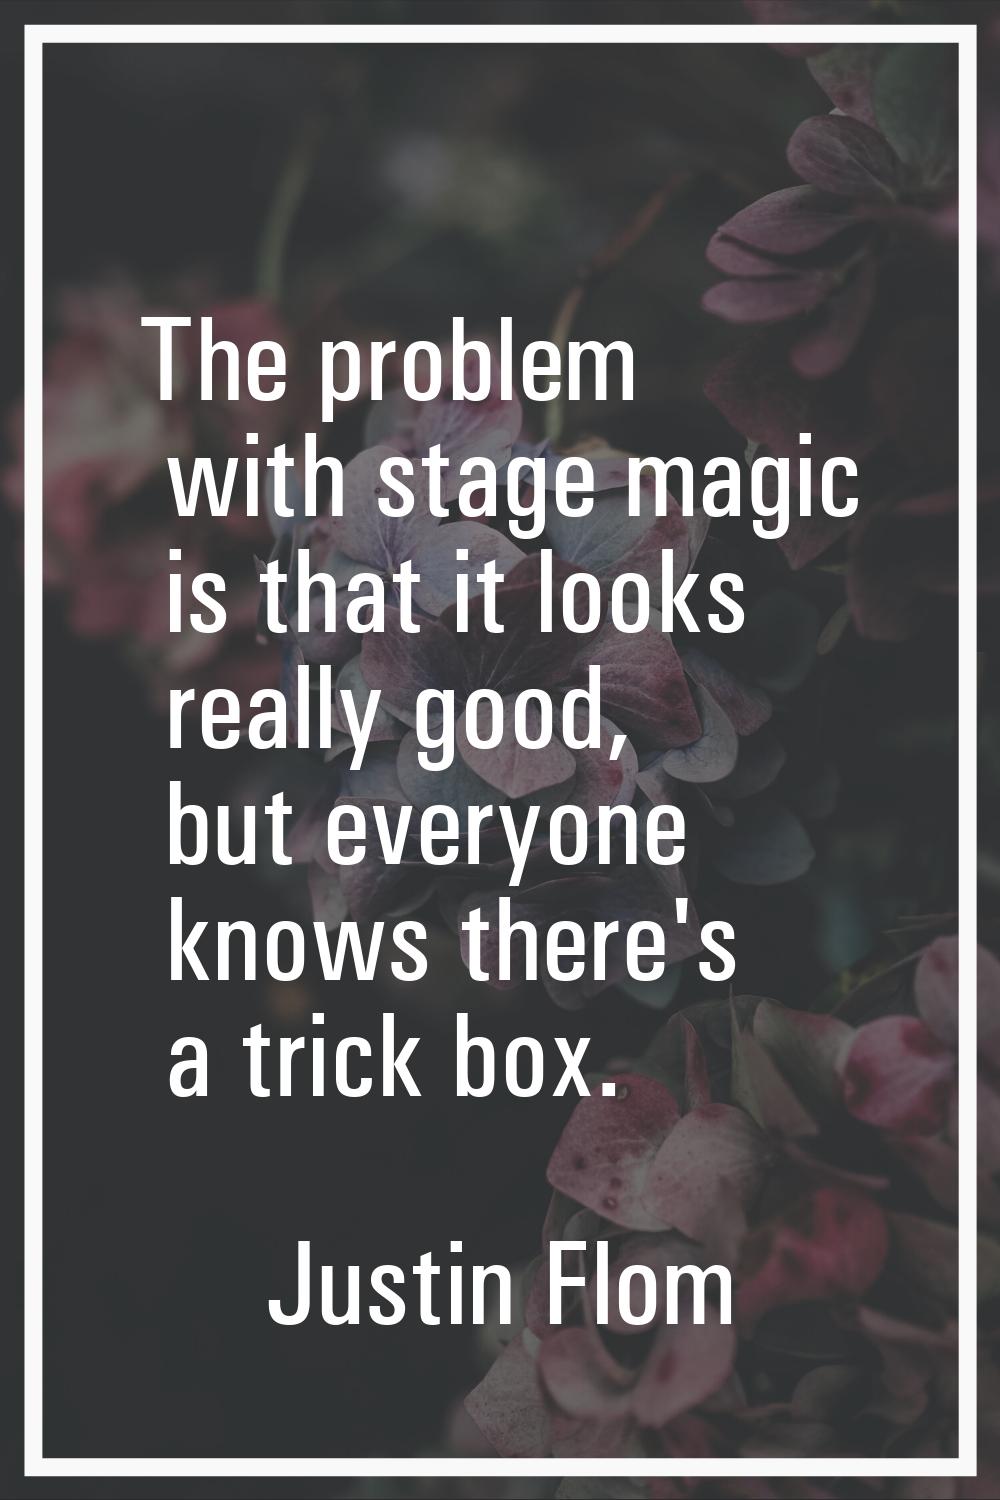 The problem with stage magic is that it looks really good, but everyone knows there's a trick box.